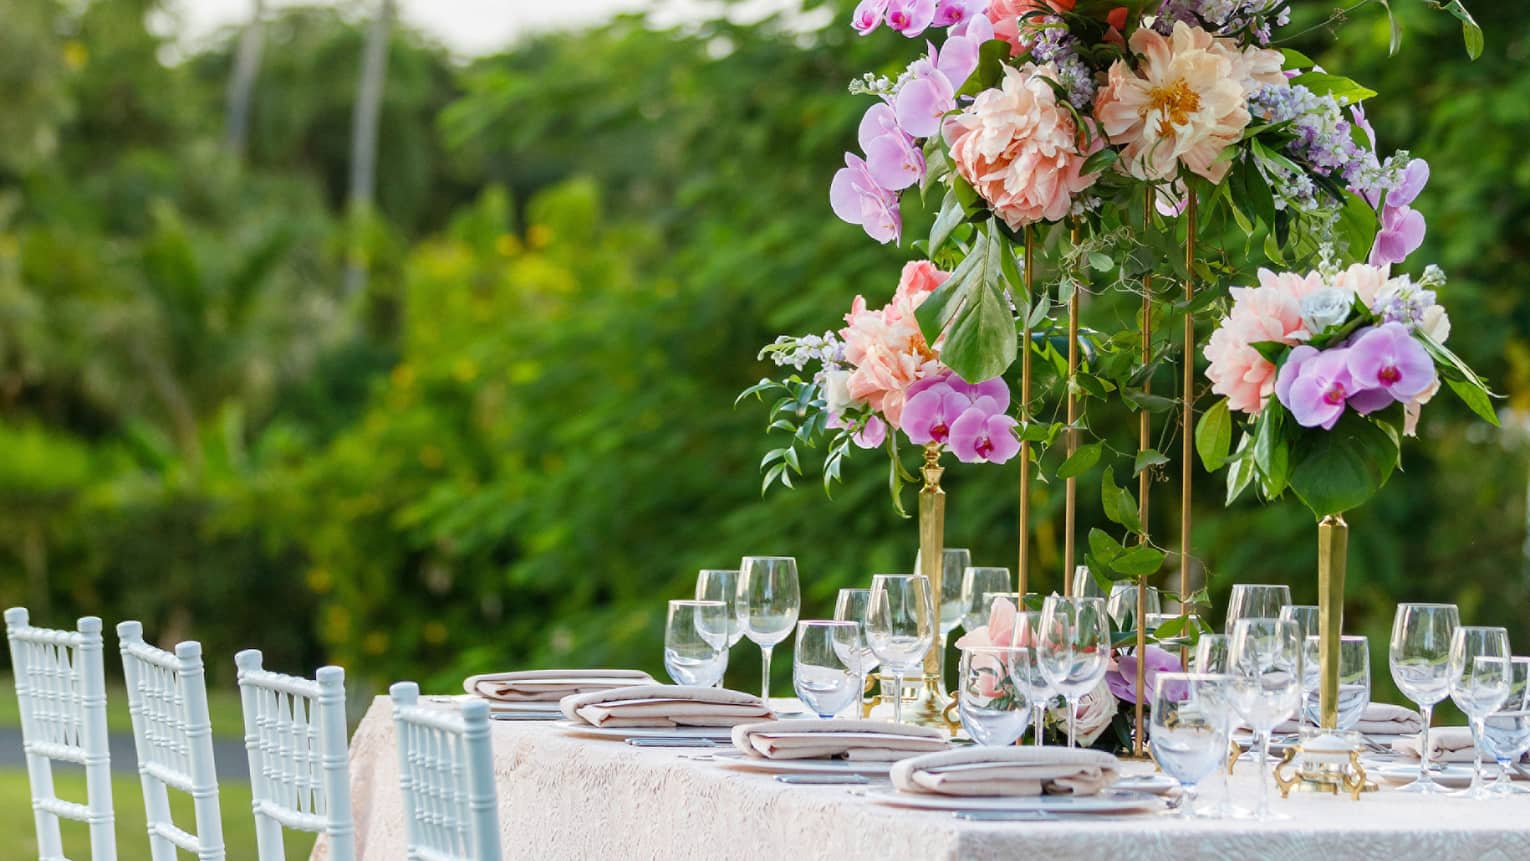 Angled set table, pink tablecloth, four white chairs, colourful floral centrepiece, trees in backdrop